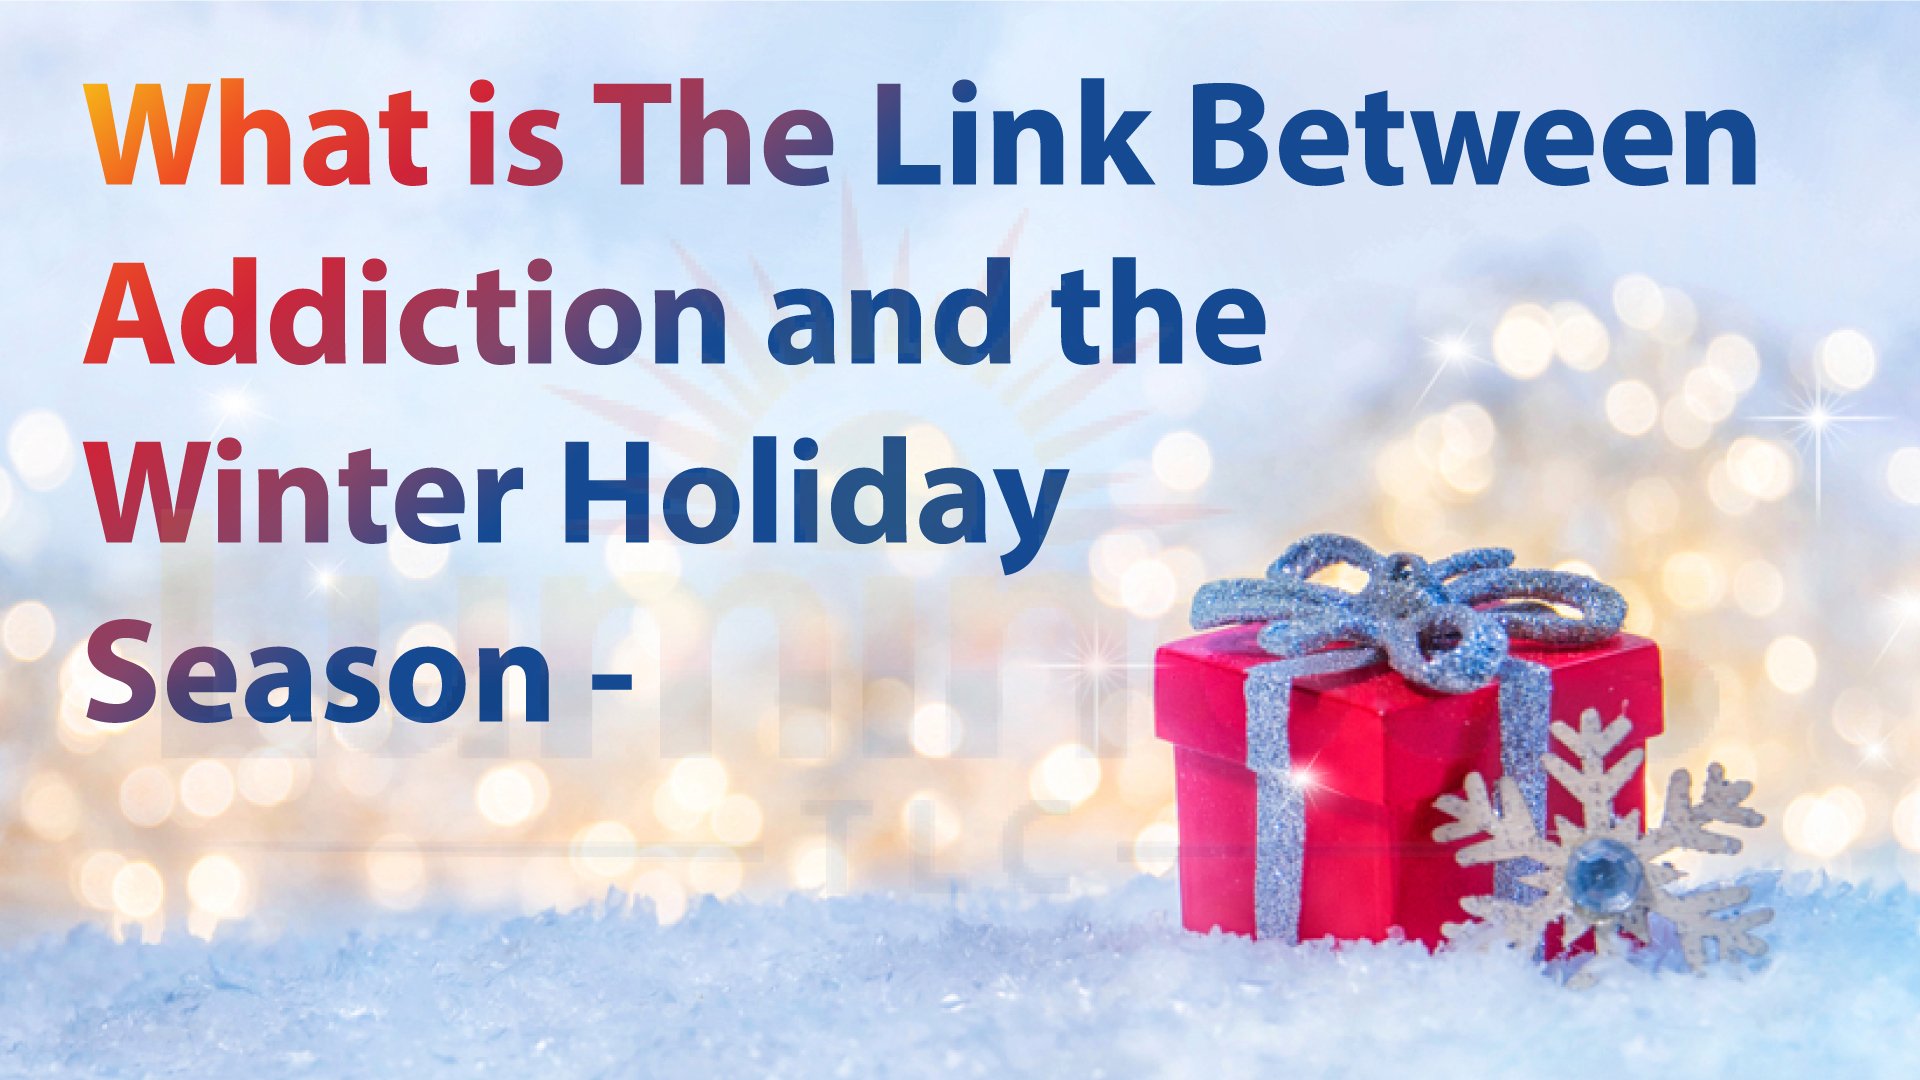 What is The Link Between Addiction and the Winter Holiday Season